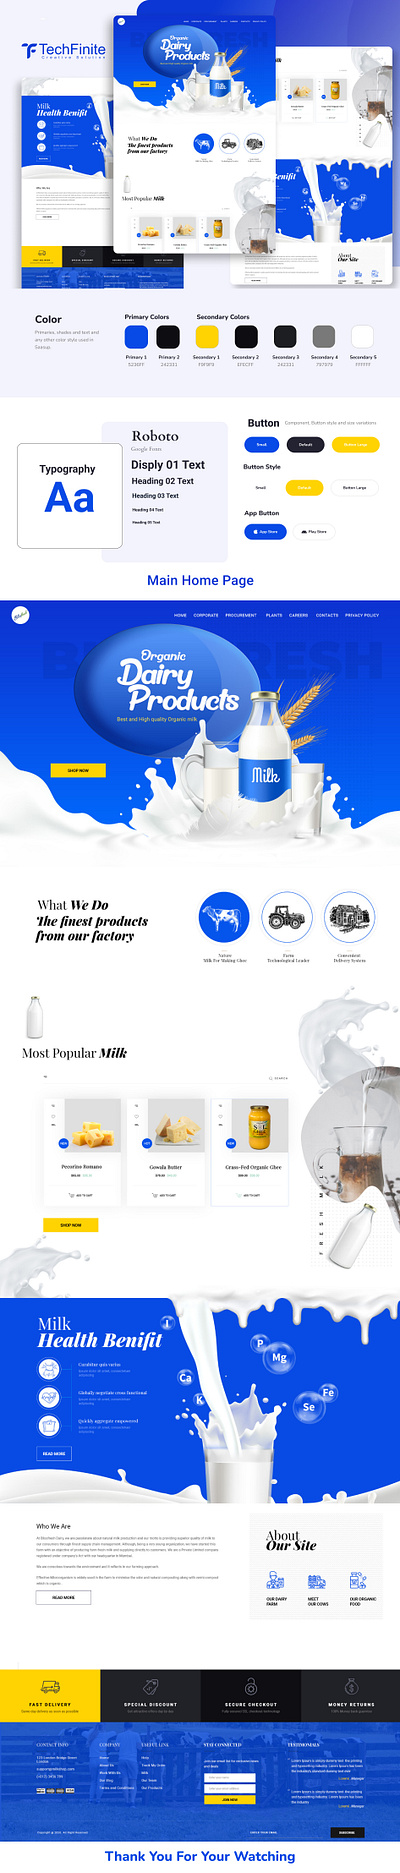 Dairy Product Web Template UI/UX Design creative design dairy design farm figma figma design figma template ui design uiux uiux design user inter userinterface ux design web web app web application web template website website design